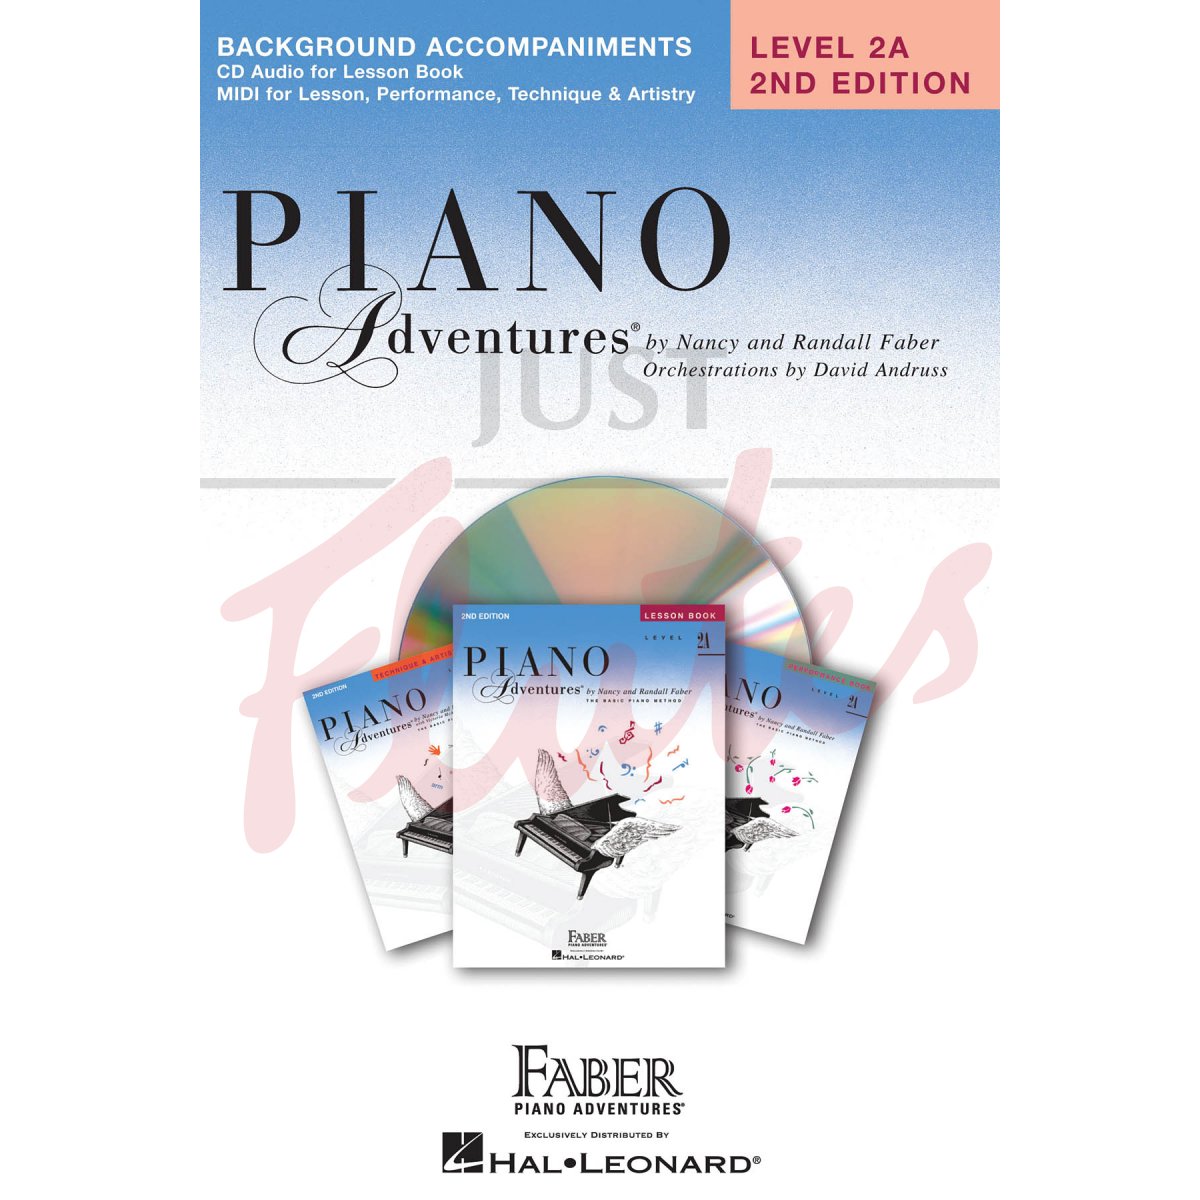 Piano Adventures Lesson Book Level 2A Accompanying CD